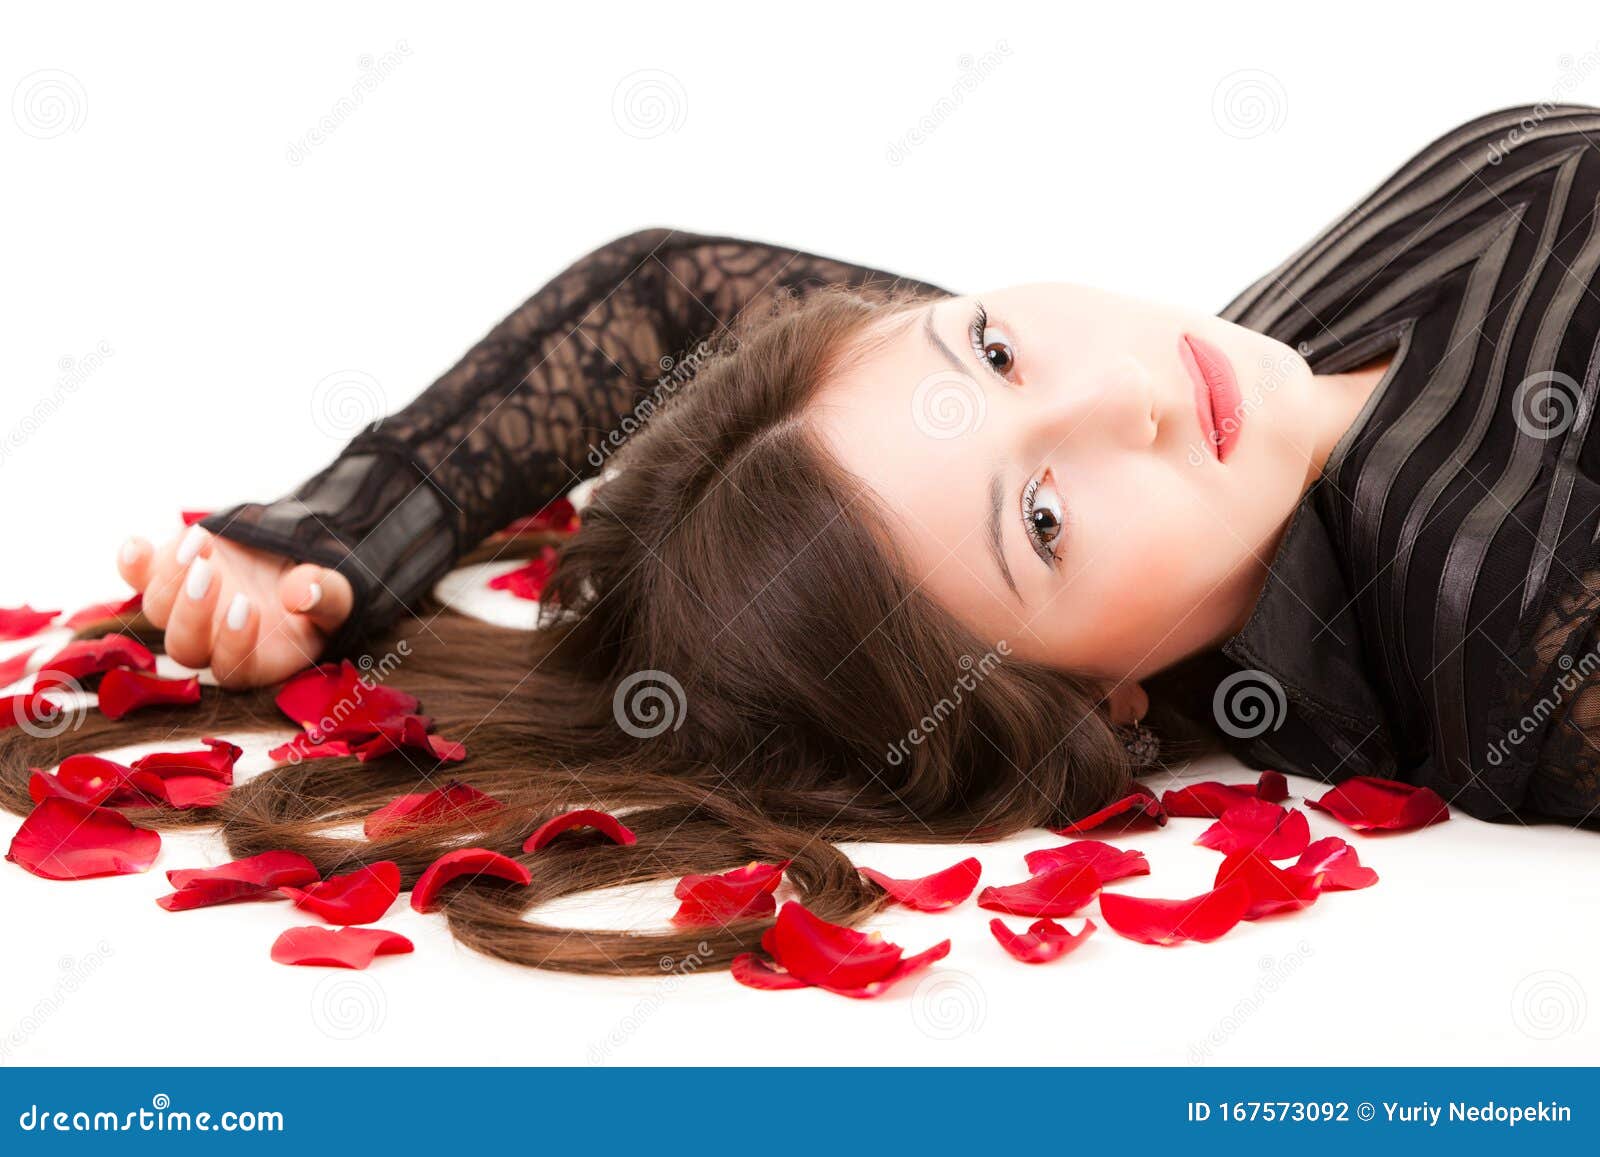 Wallpaper leaves, girl, background, roses, petals, hairstyle for mobile and  desktop, section стиль, resolution 8000x6421 - download